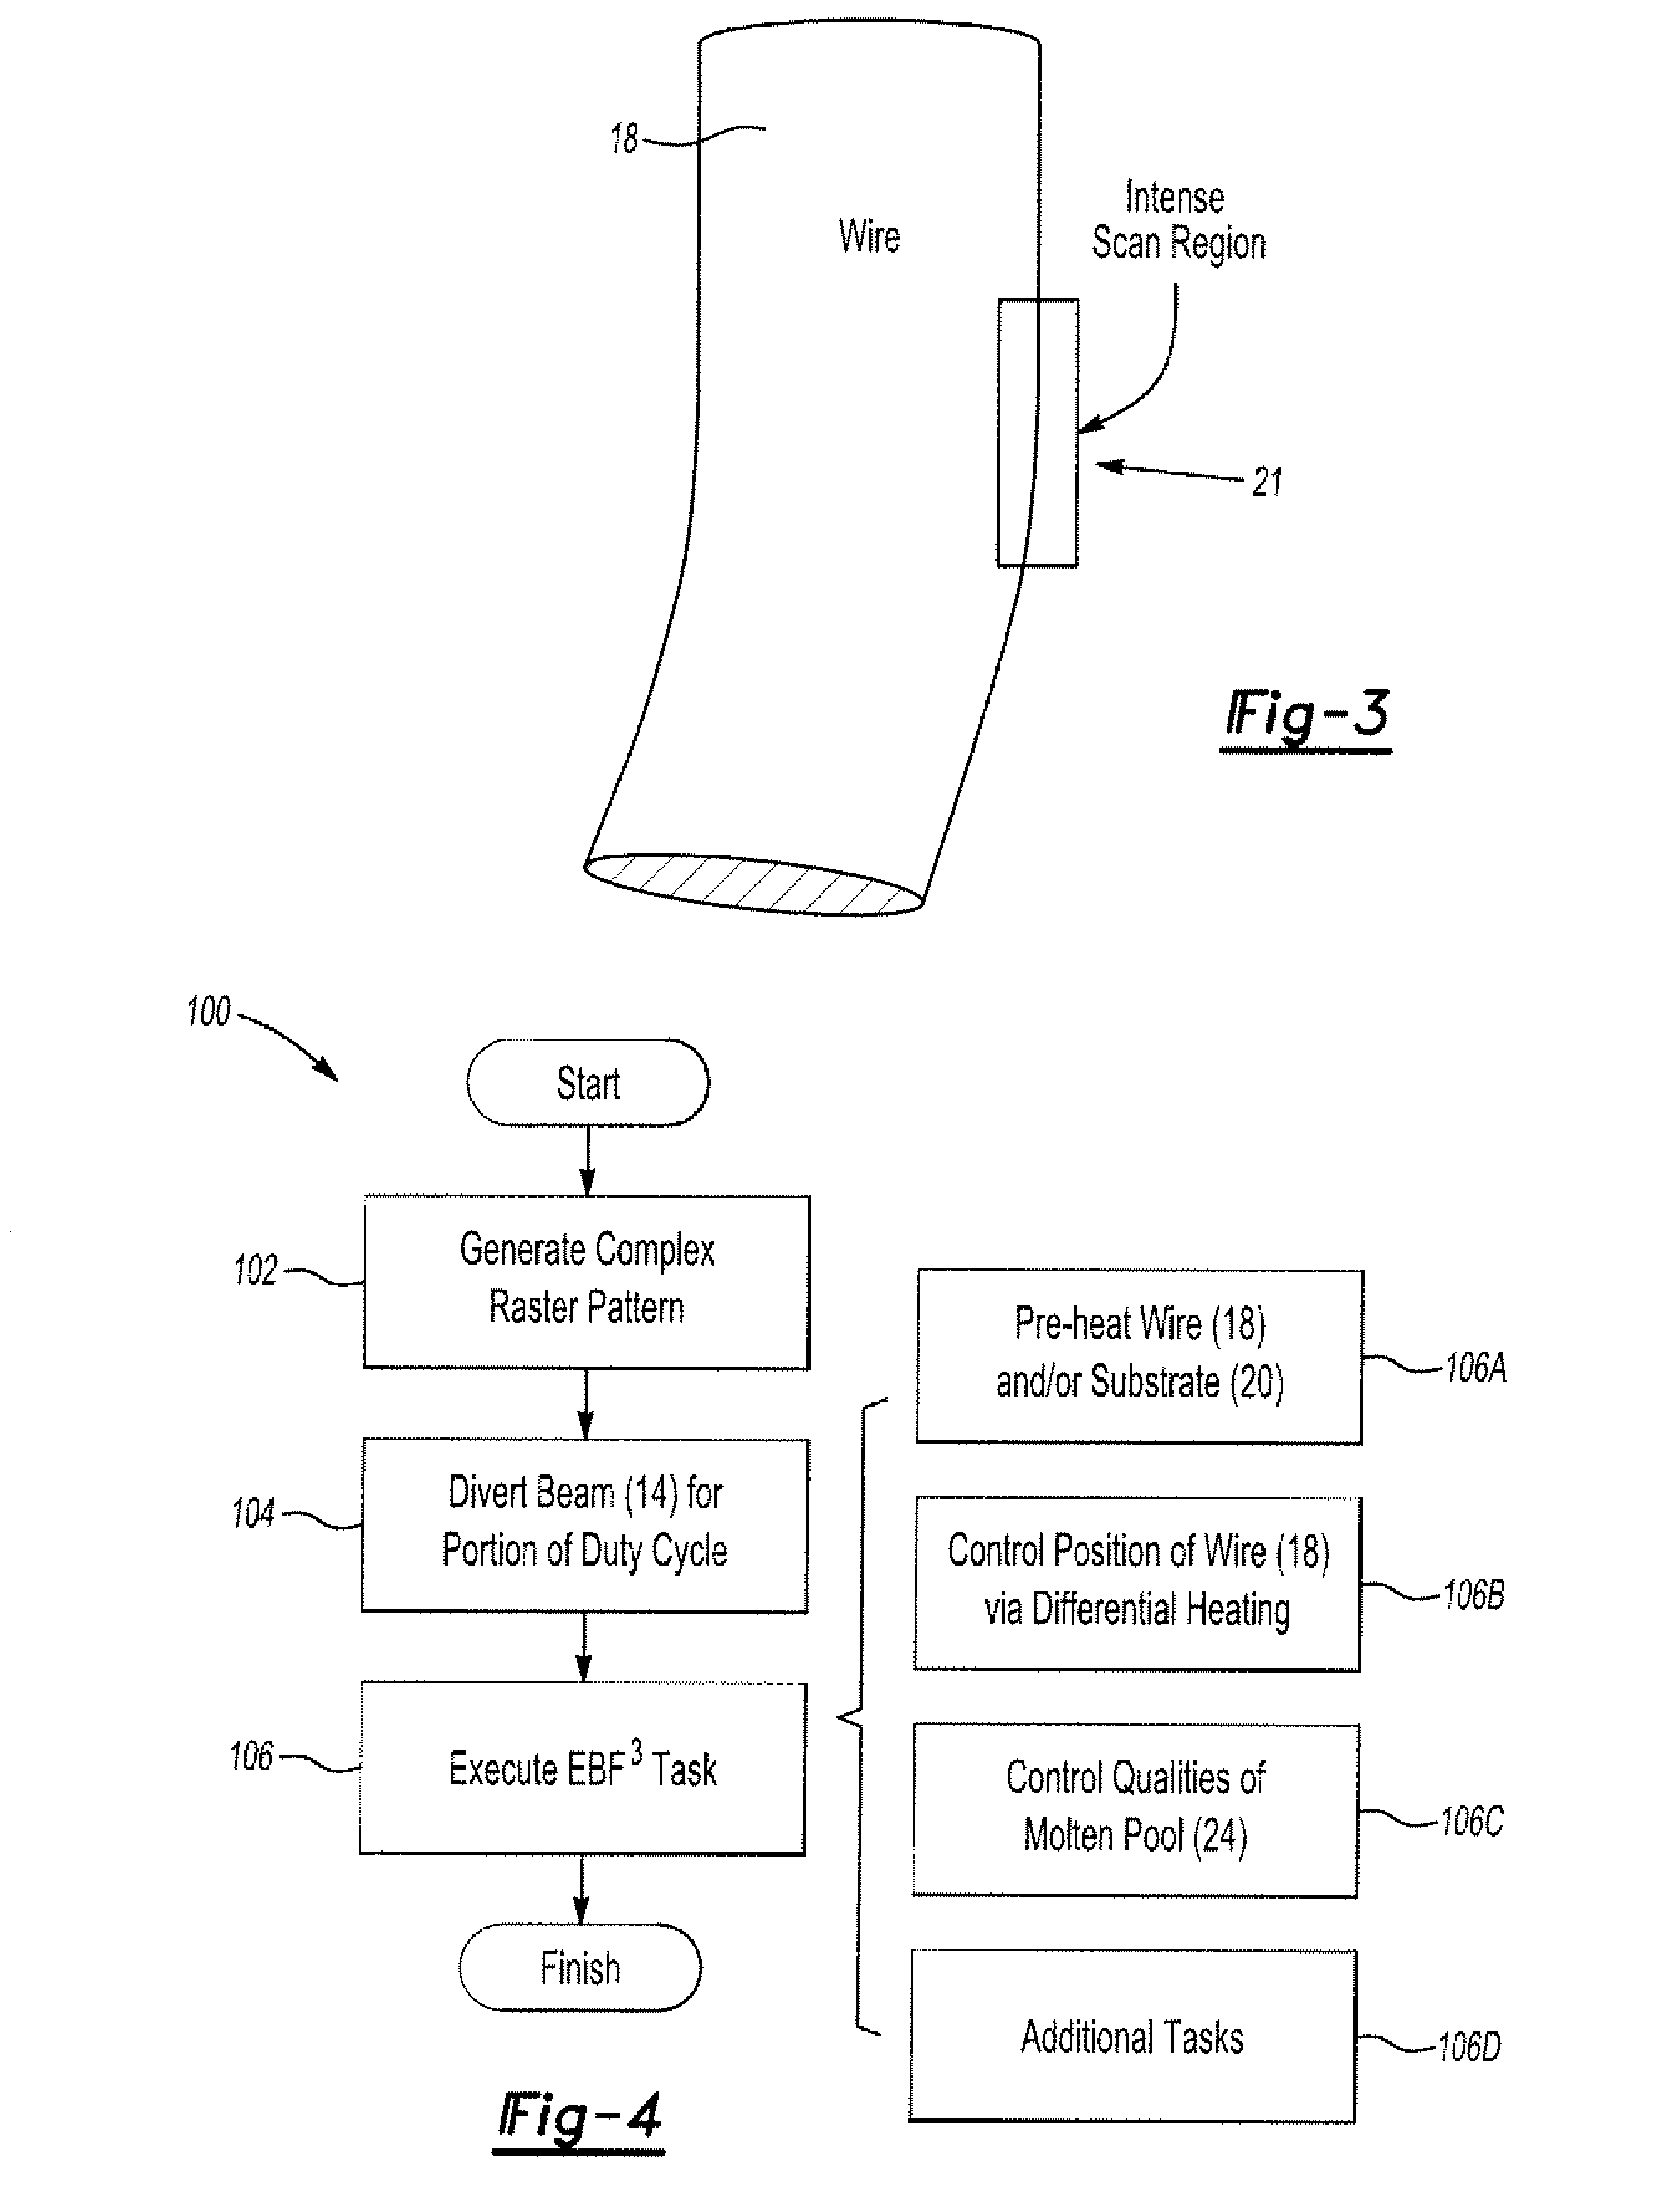 Use of beam deflection to control an electron beam wire deposition process